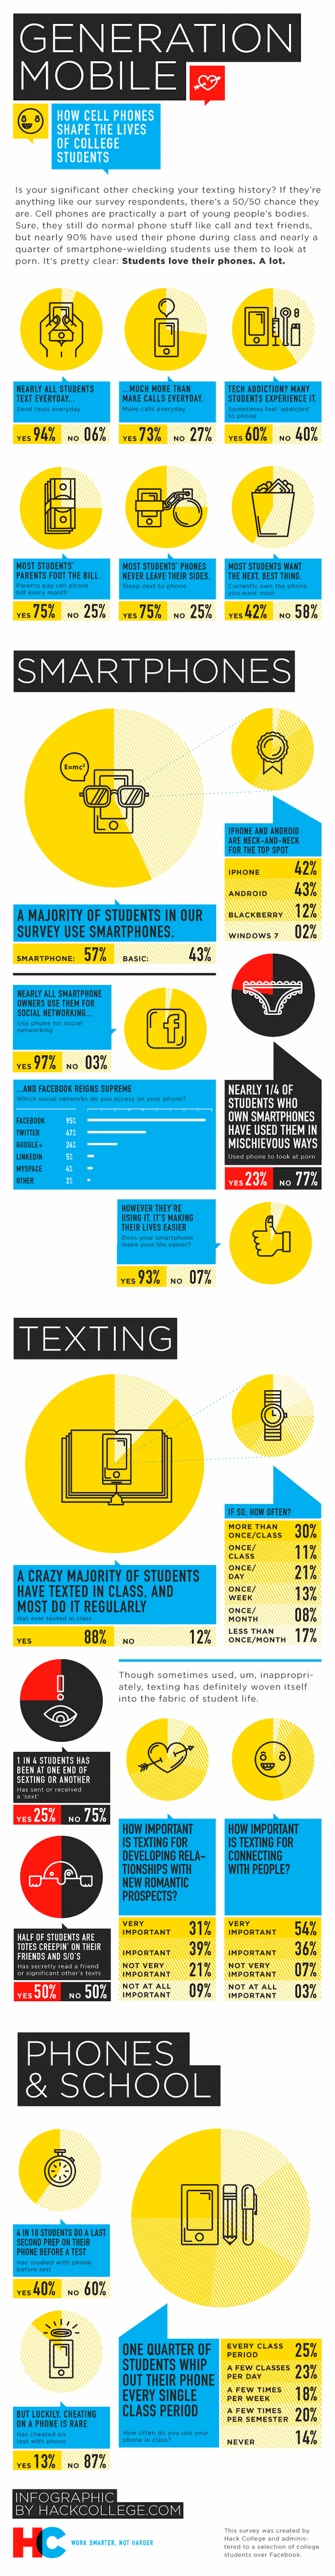 SMS Marketing to Collge Students Infographic